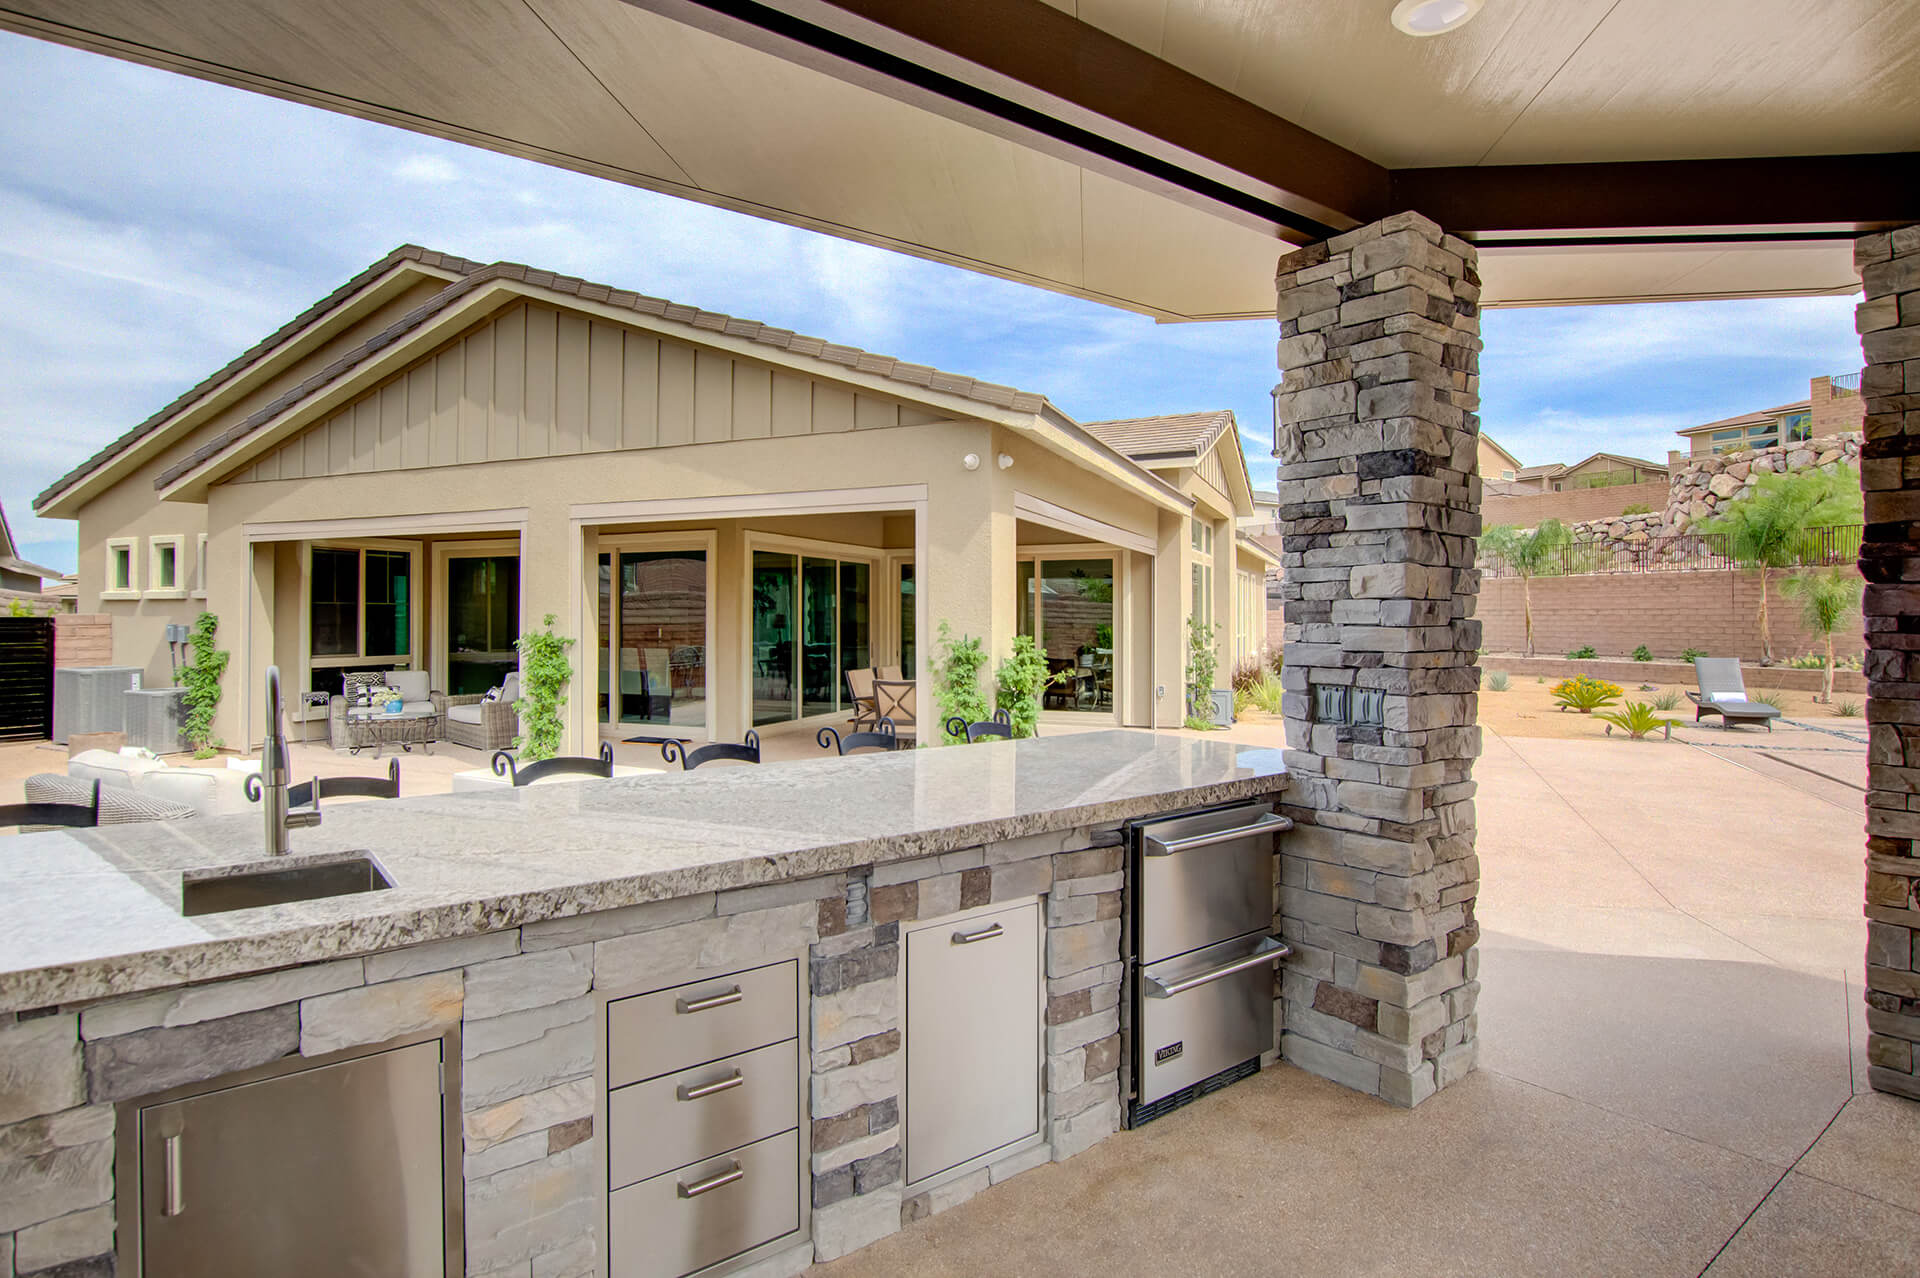 Custom Outdoor Living - Custom Outdoor Kitchen and Living Environment Design and Construction